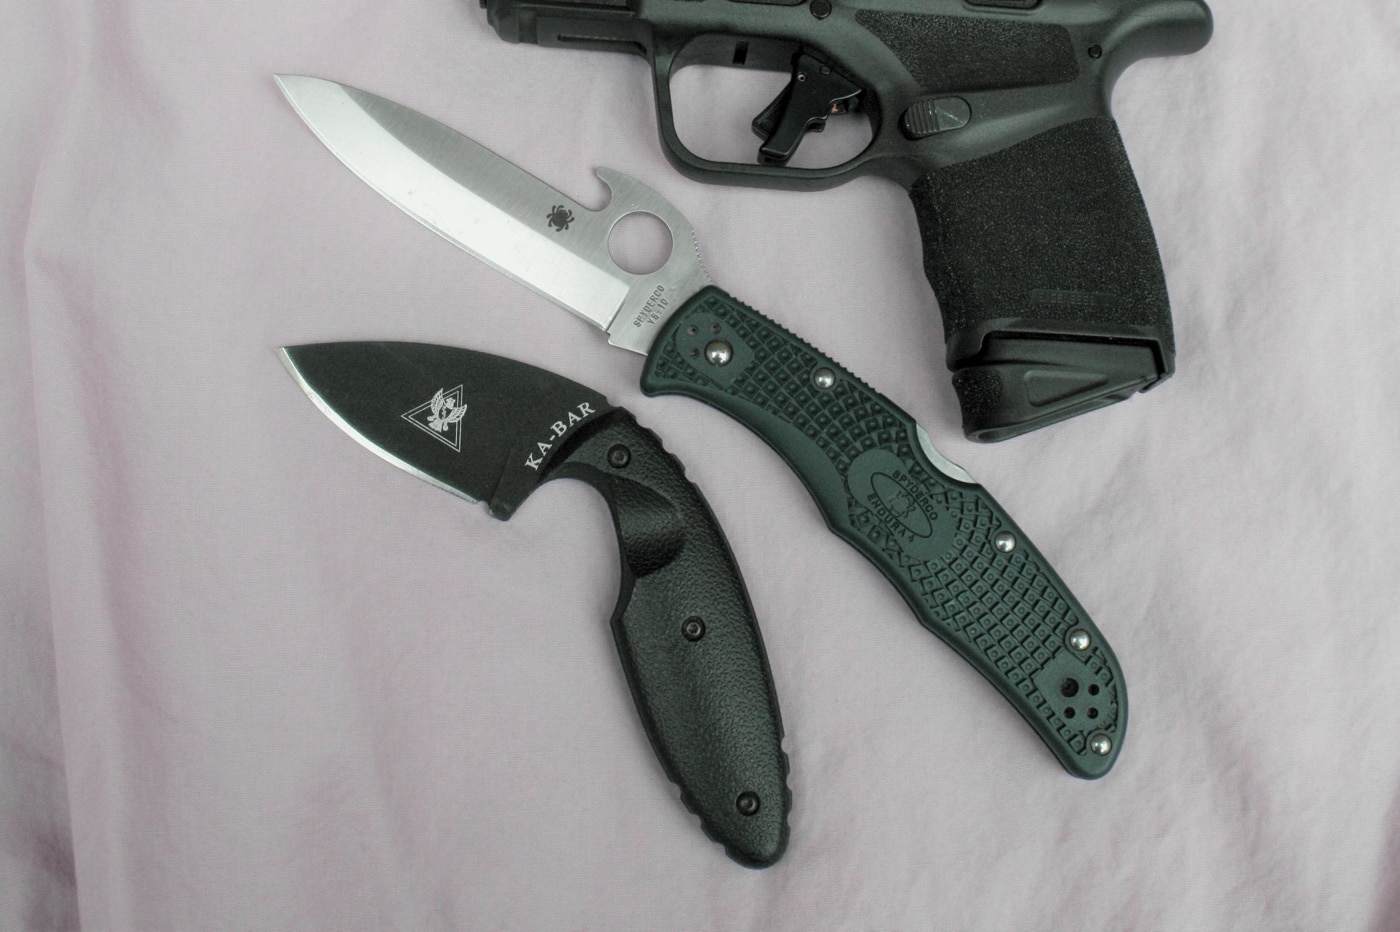 fixed blade knife compared to folding blade knife for every day carry with springfield hellcat 9mm pistol